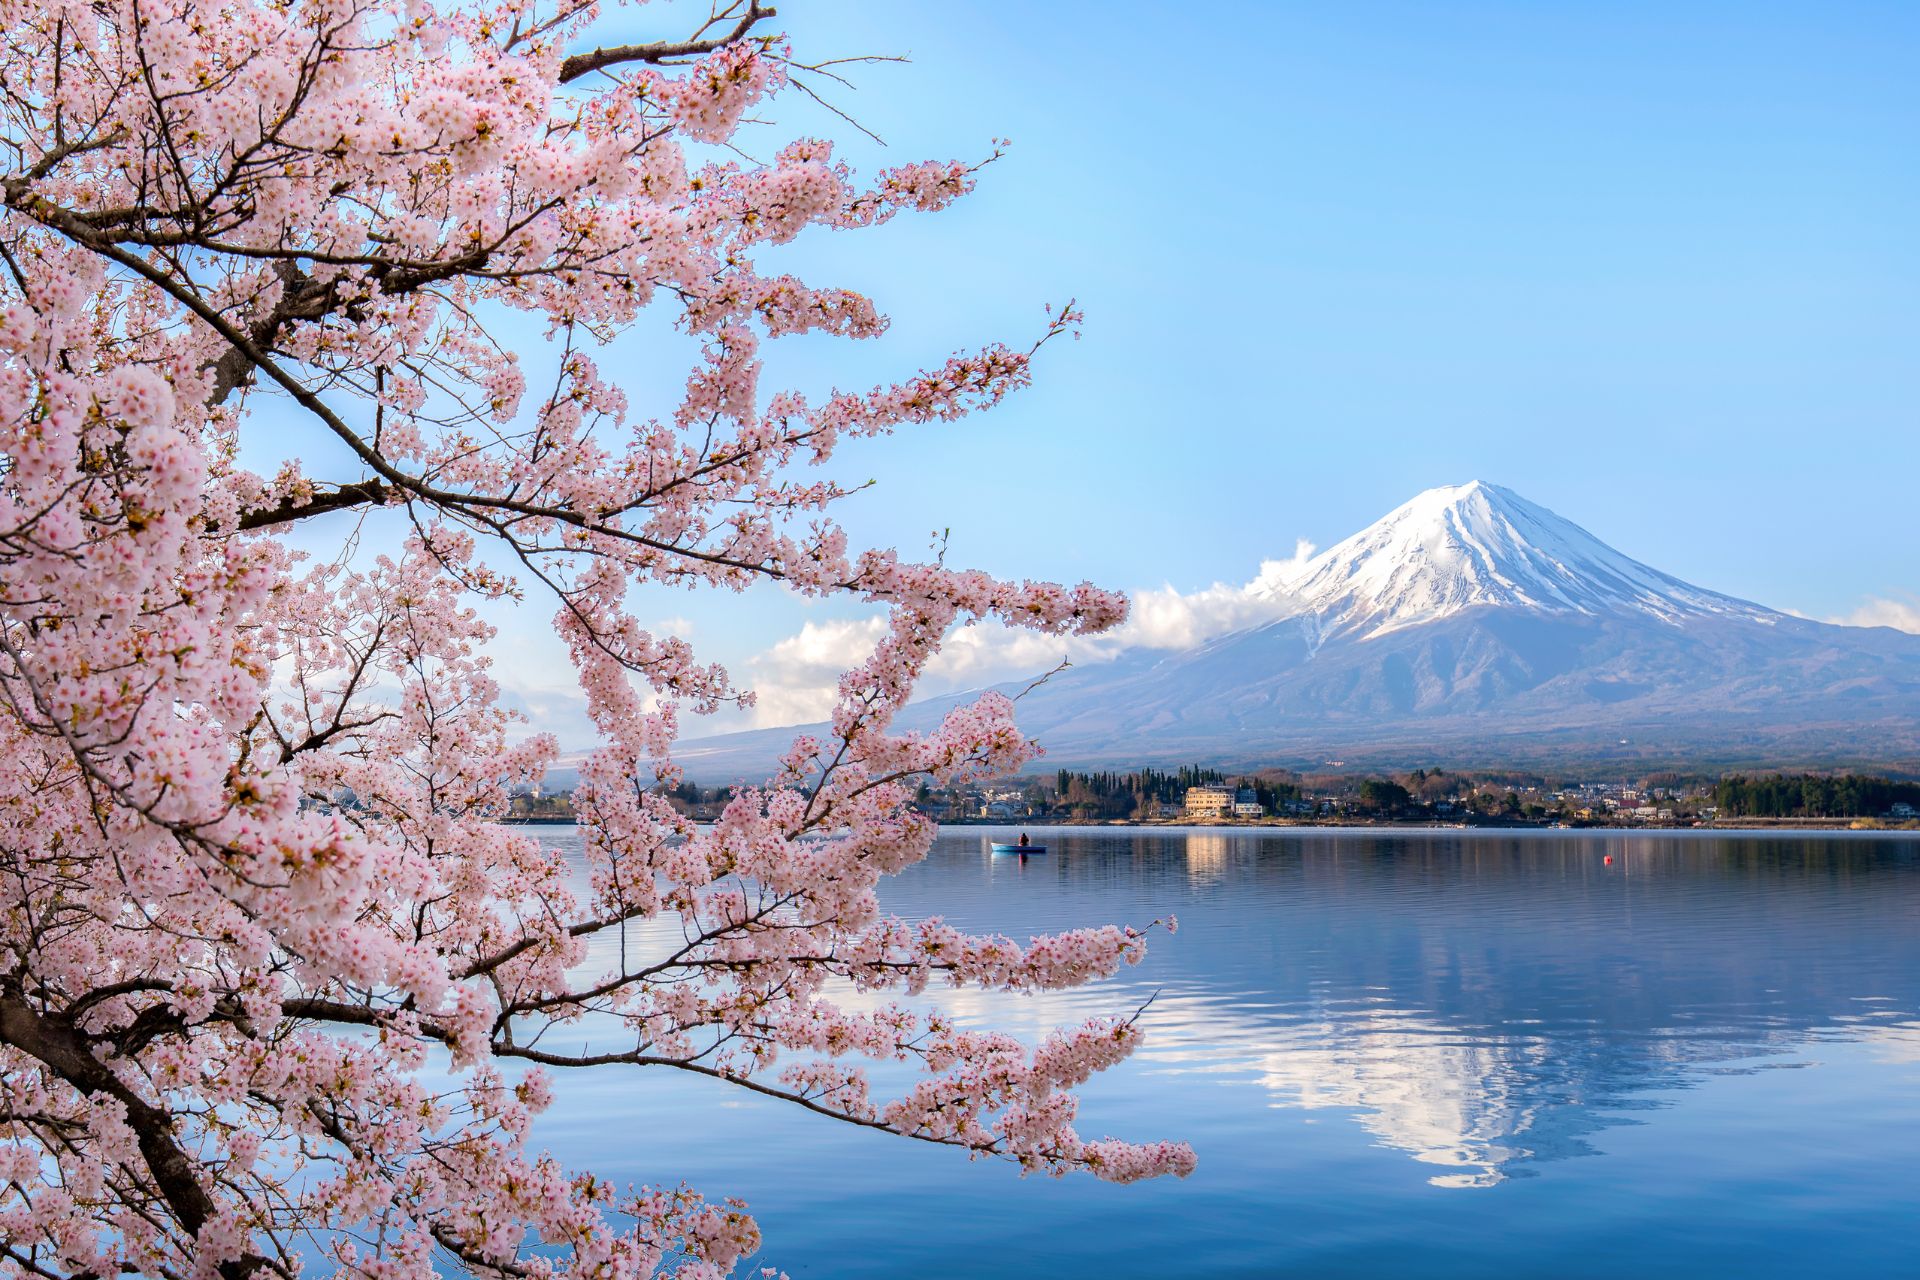 Mount fuji at Lake kawaguchiko with cherry blossom in Yamanashi near Tokyo, Japan by Phattana from Getty Images Pro